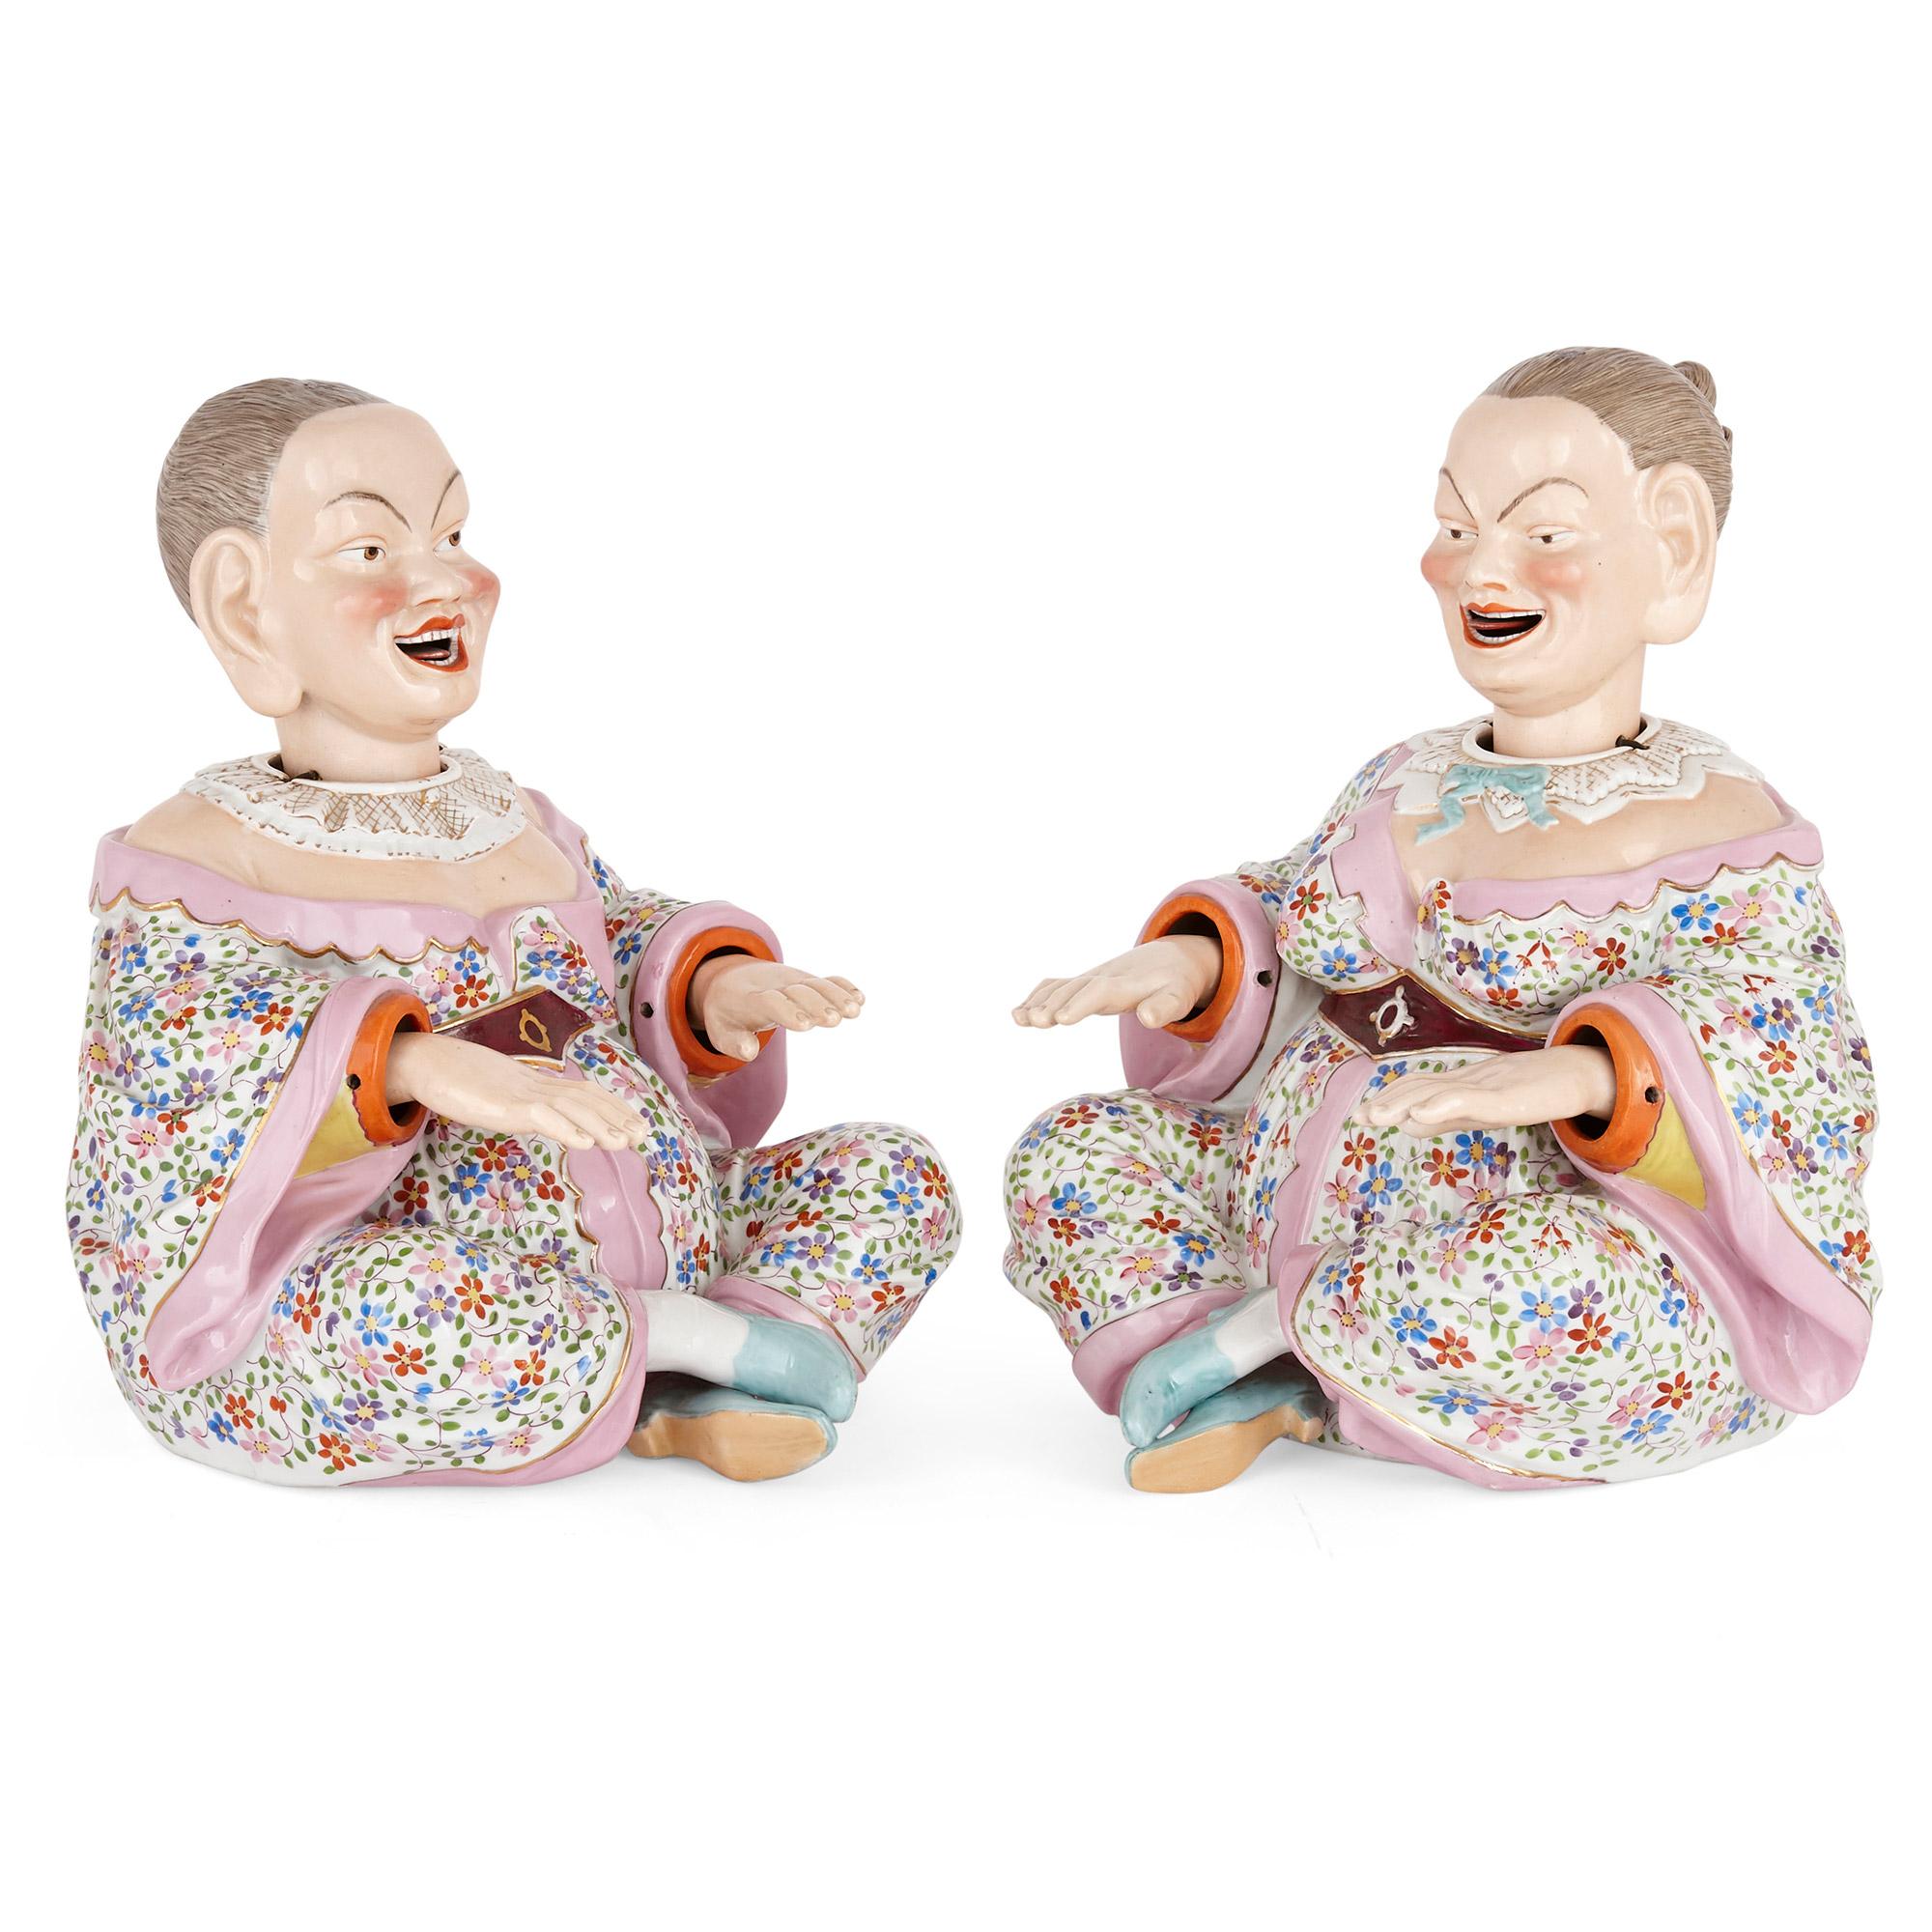 These Ernst Bohne Söhne porcelain models take the form of a Chinese couple, who sit with their legs crossed. They have large bellies and ears, and broad grins on their faces. Both figures wear parcel gilt collared shirts and loose robes, decorated